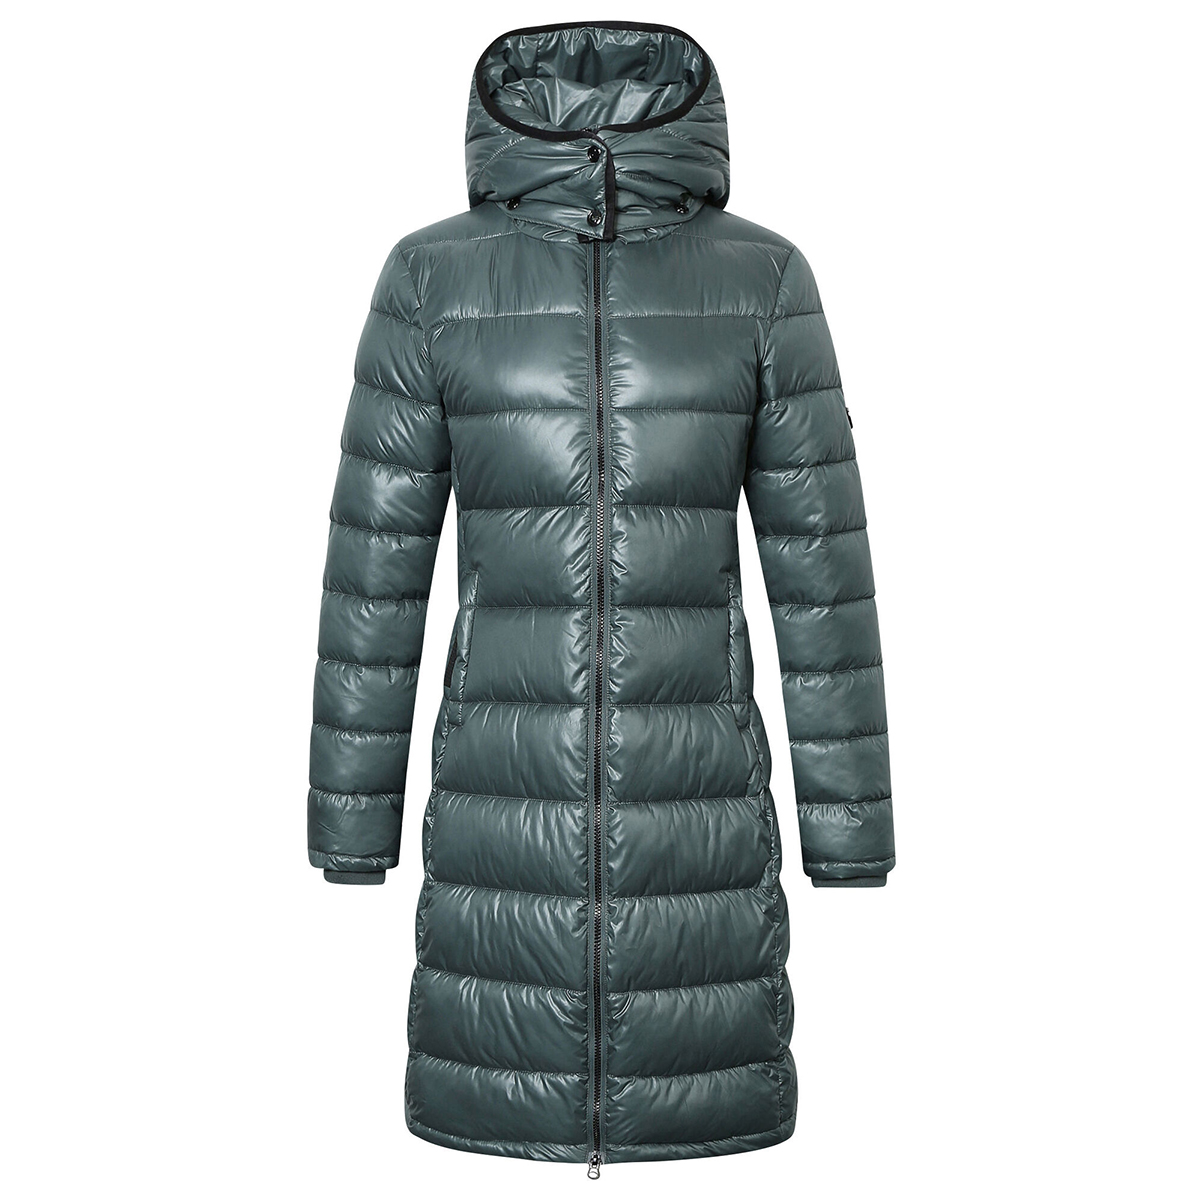 Jas Covalliero Quilted Long Middenblauw, M in middenblauw